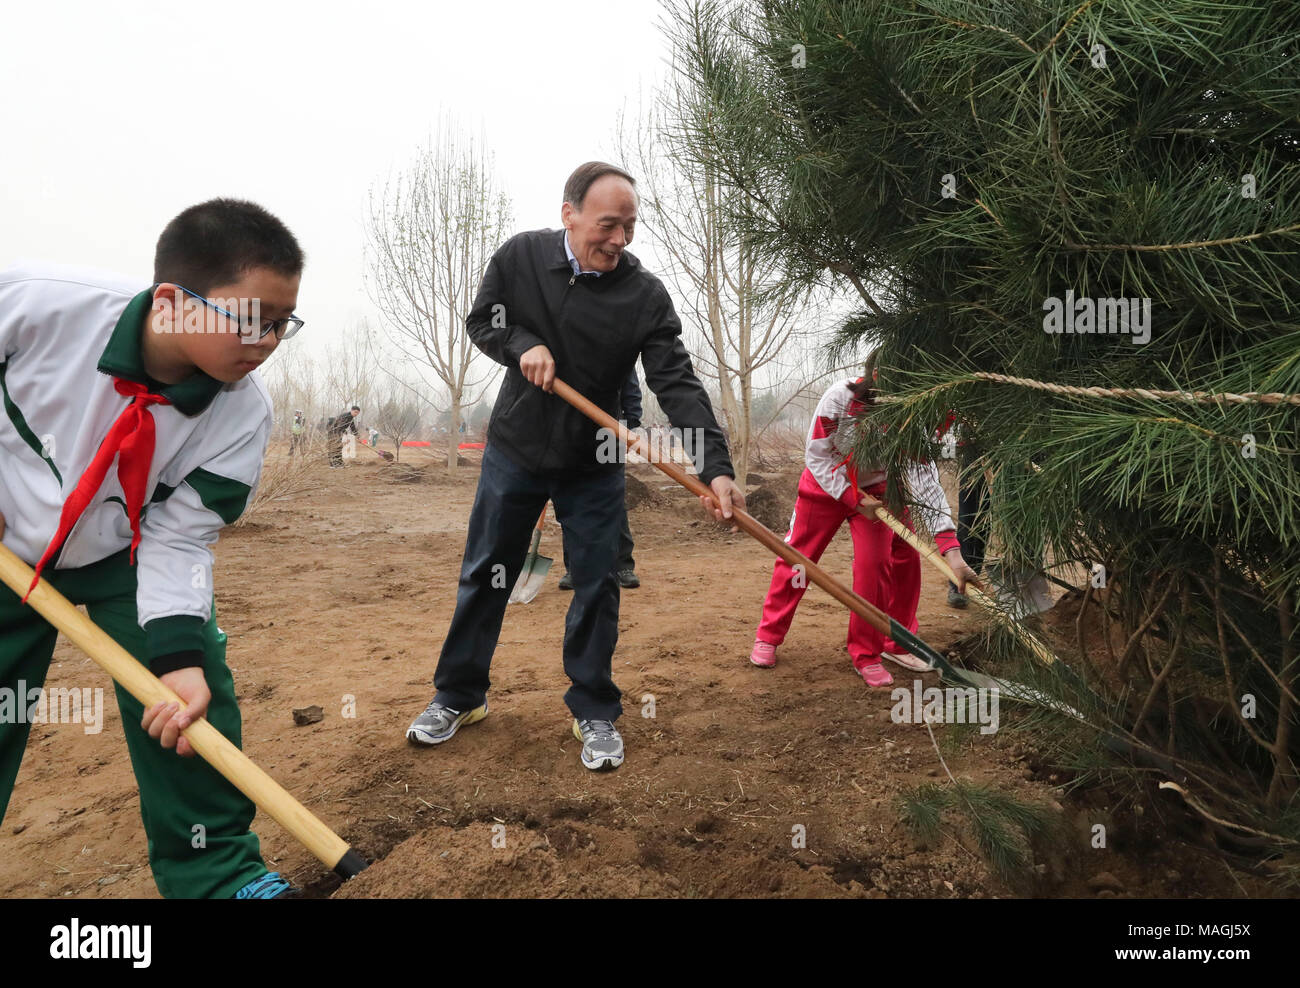 Beijing, China. 2nd Apr, 2018. Chinese Vice President Wang Qishan (2nd L) joins a voluntary tree planting activity in the eastern suburbs of Beijing, capital of China, April 2, 2018. Other Chinese leaders including Xi Jinping, Li Keqiang, Li Zhanshu, Wang Yang, Wang Huning, Zhao Leji and Han Zheng also attended the event. Credit: Ding Lin/Xinhua/Alamy Live News Stock Photo